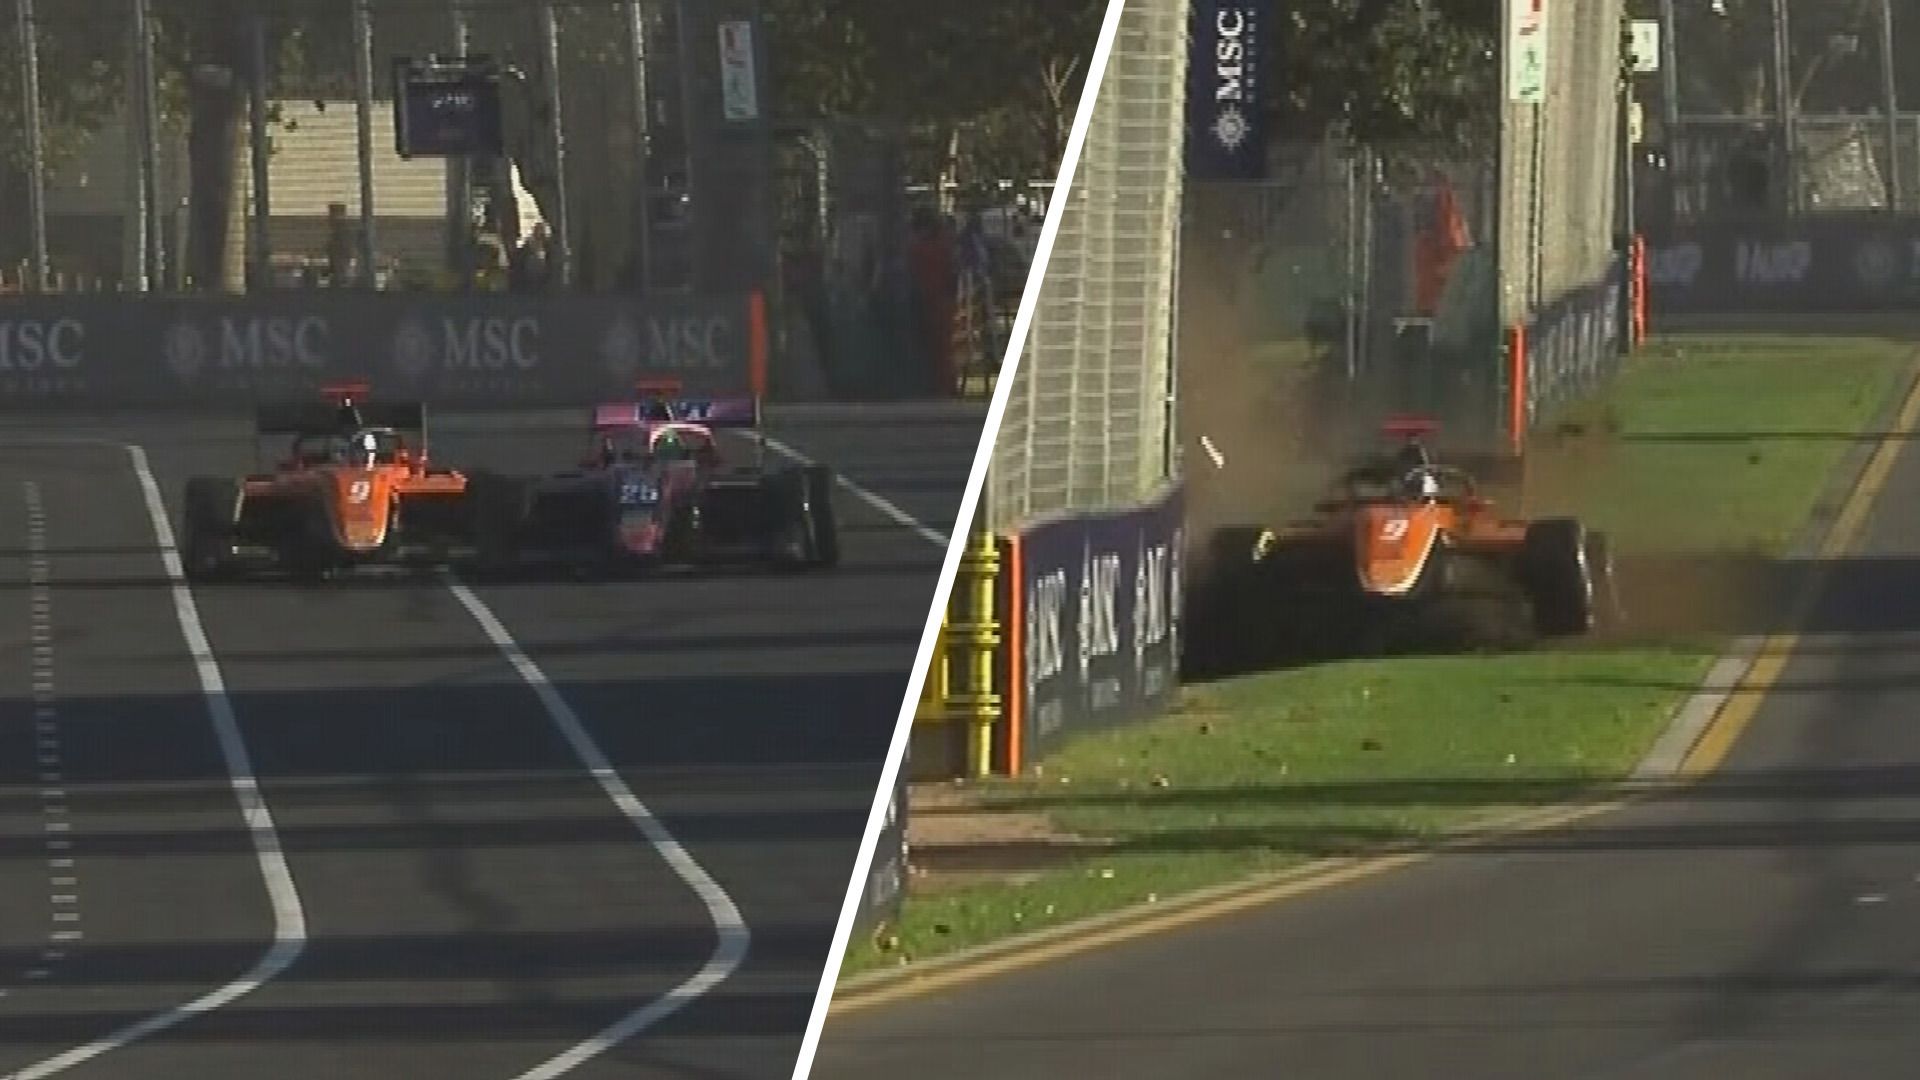 'Incredibly dangerous': Driver in hot water after shoving rival into wall at Australian Grand Prix